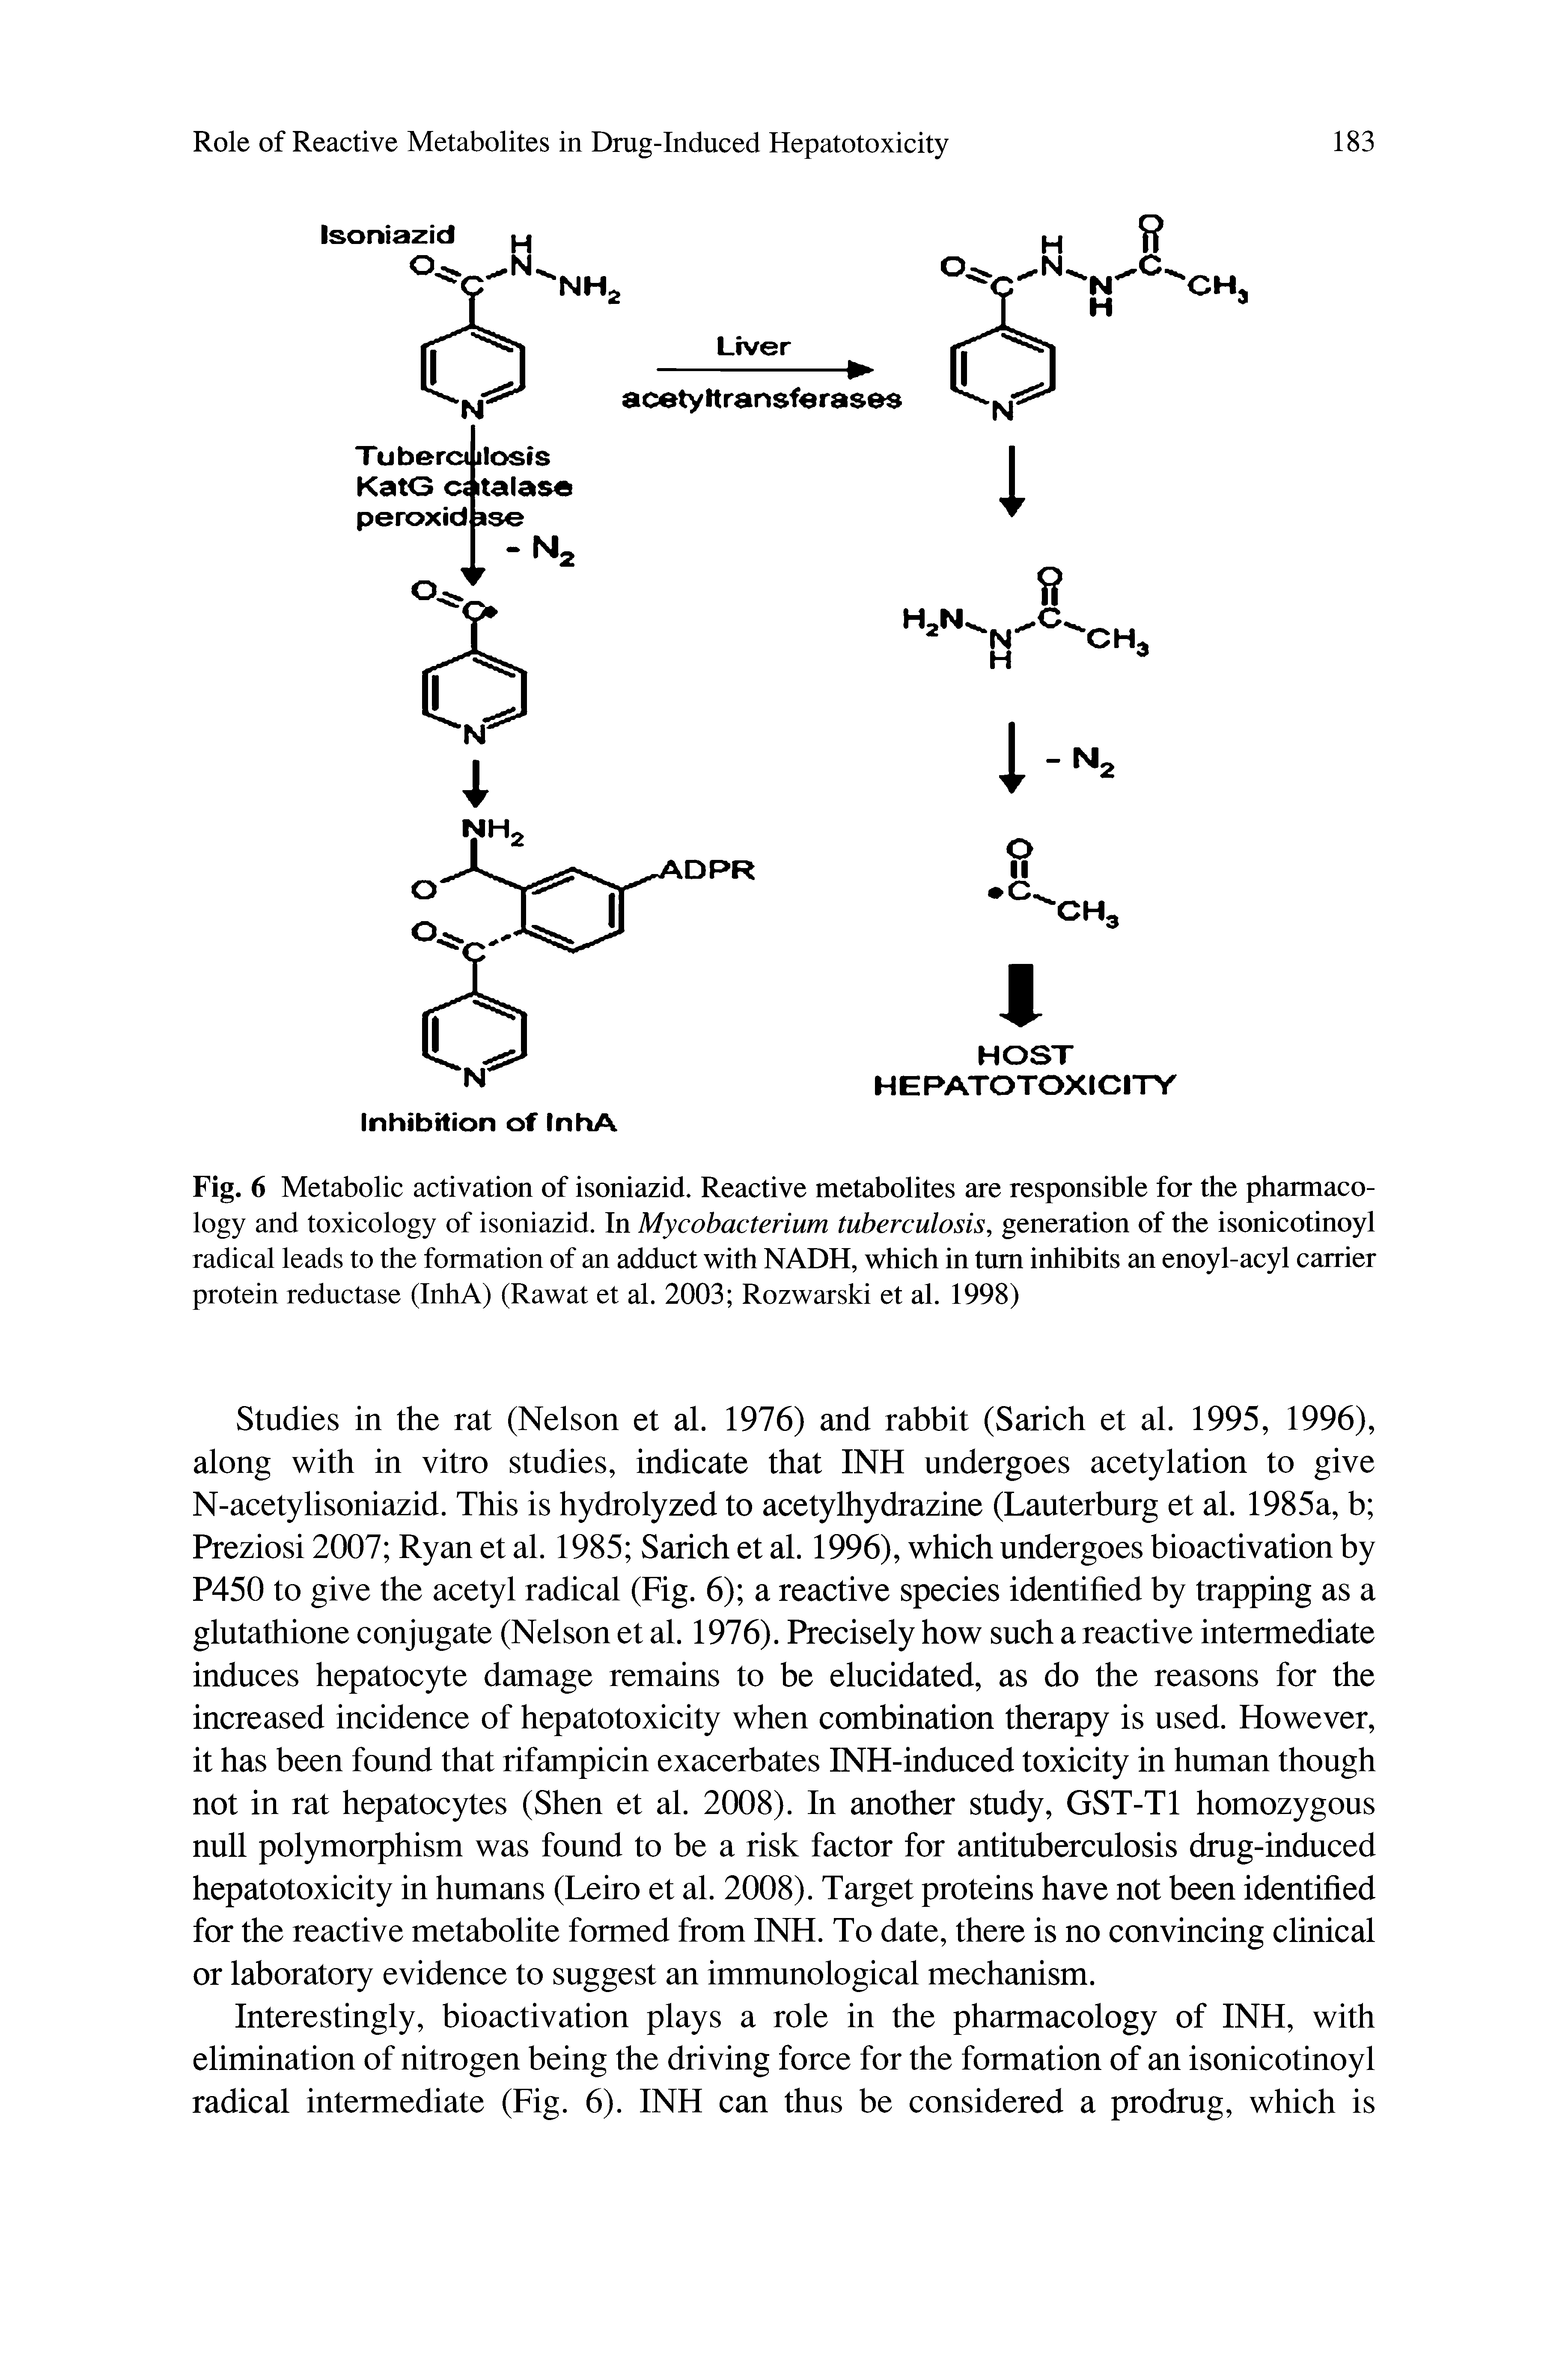 Fig. 6 Metabolic activation of isoniazid. Reactive metabolites are responsible for the pharmacology and toxicology of isoniazid. In Mycobacterium tuberculosis, generation of the isonicotinoyl radical leads to the formation of an adduct with NADH, which in turn inhibits an enoyl-acyl carrier protein reductase (InhA) (Rawat et al. 2003 Rozwarski et al. 1998)...